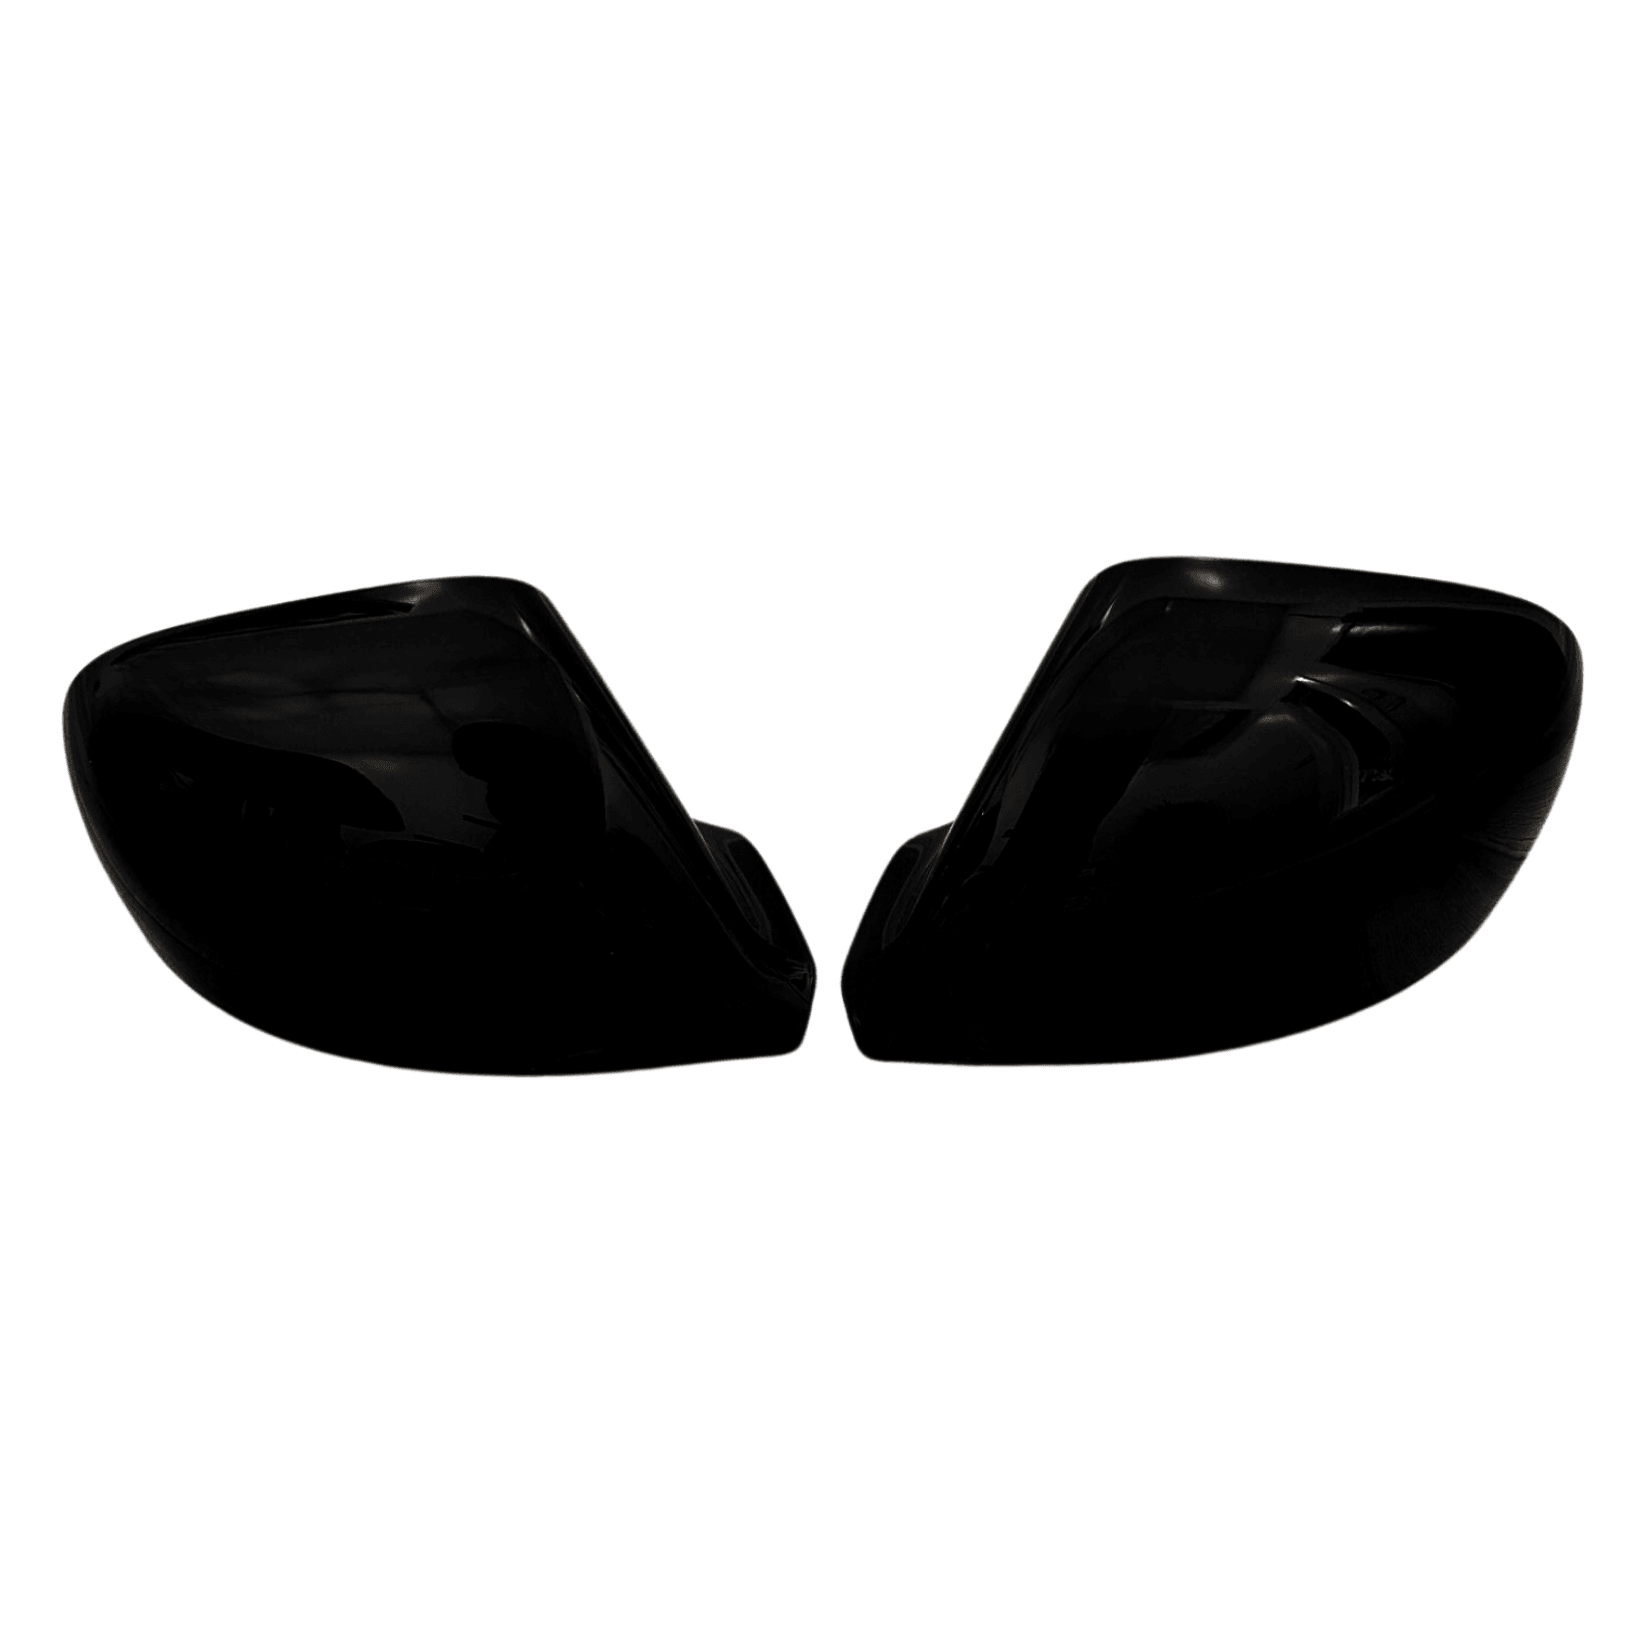 VW TRANSPORTER T5 T6 T6.1 MIRROR COVERS IN GLOSS BLACK - PAIR - Storm Xccessories